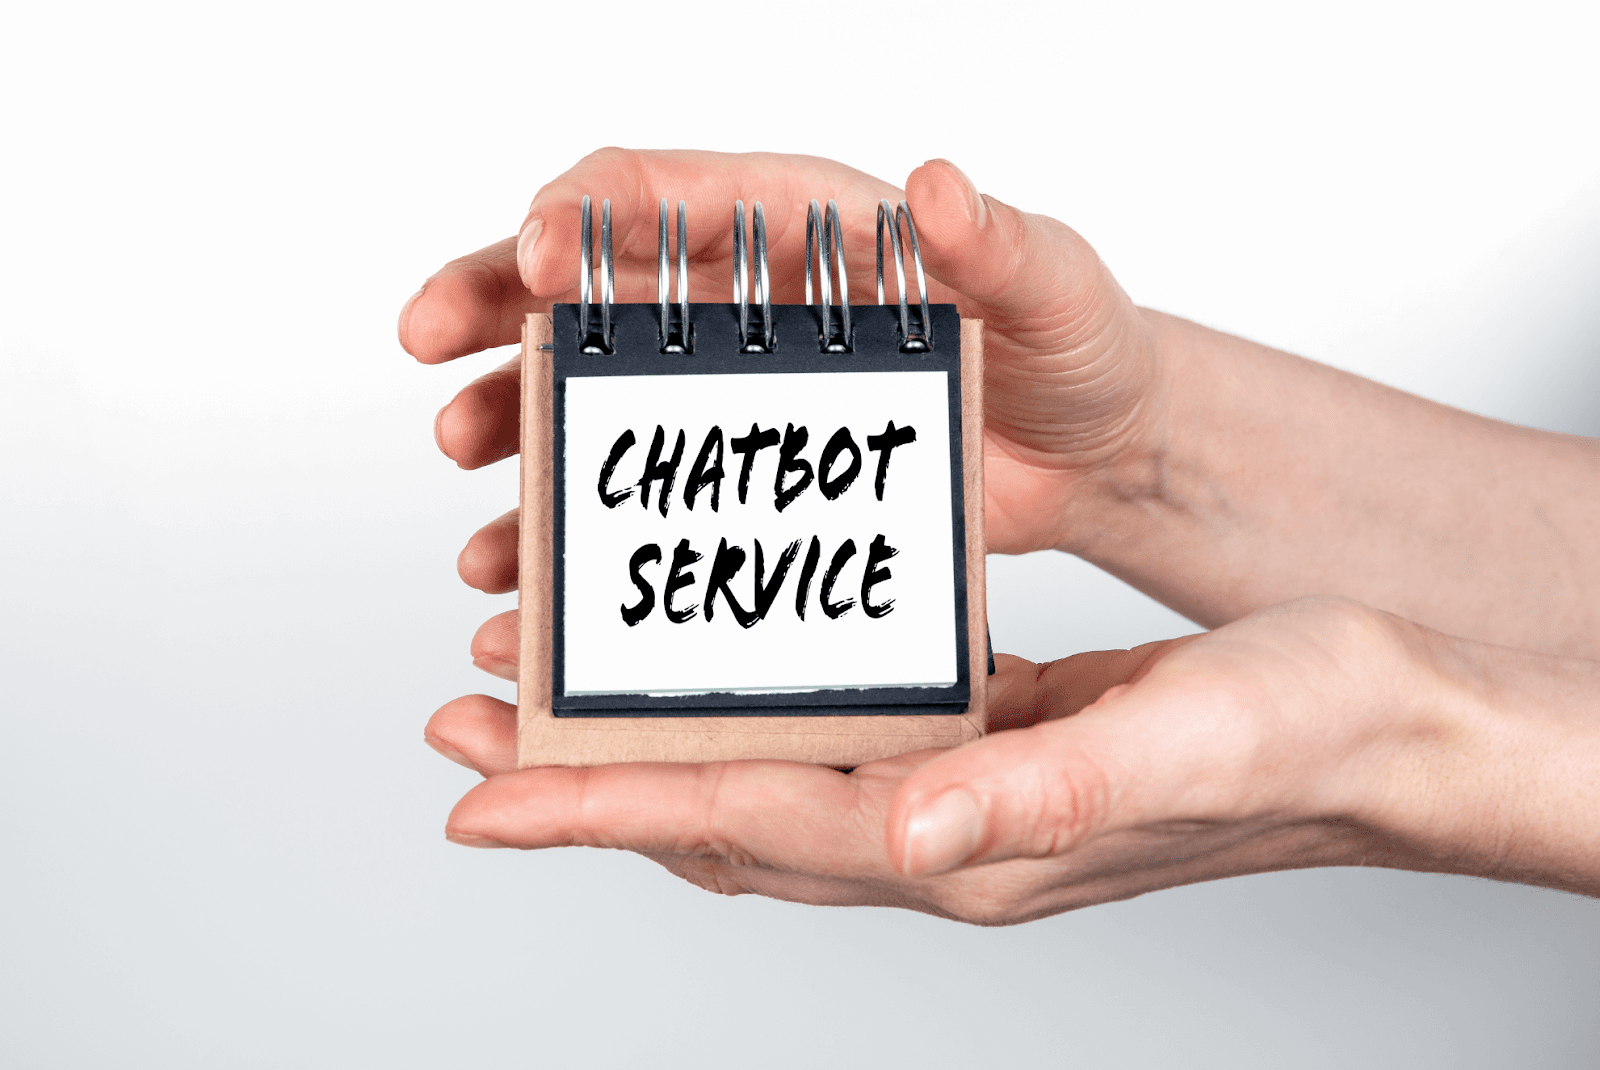 Chatbot use cases for customer service